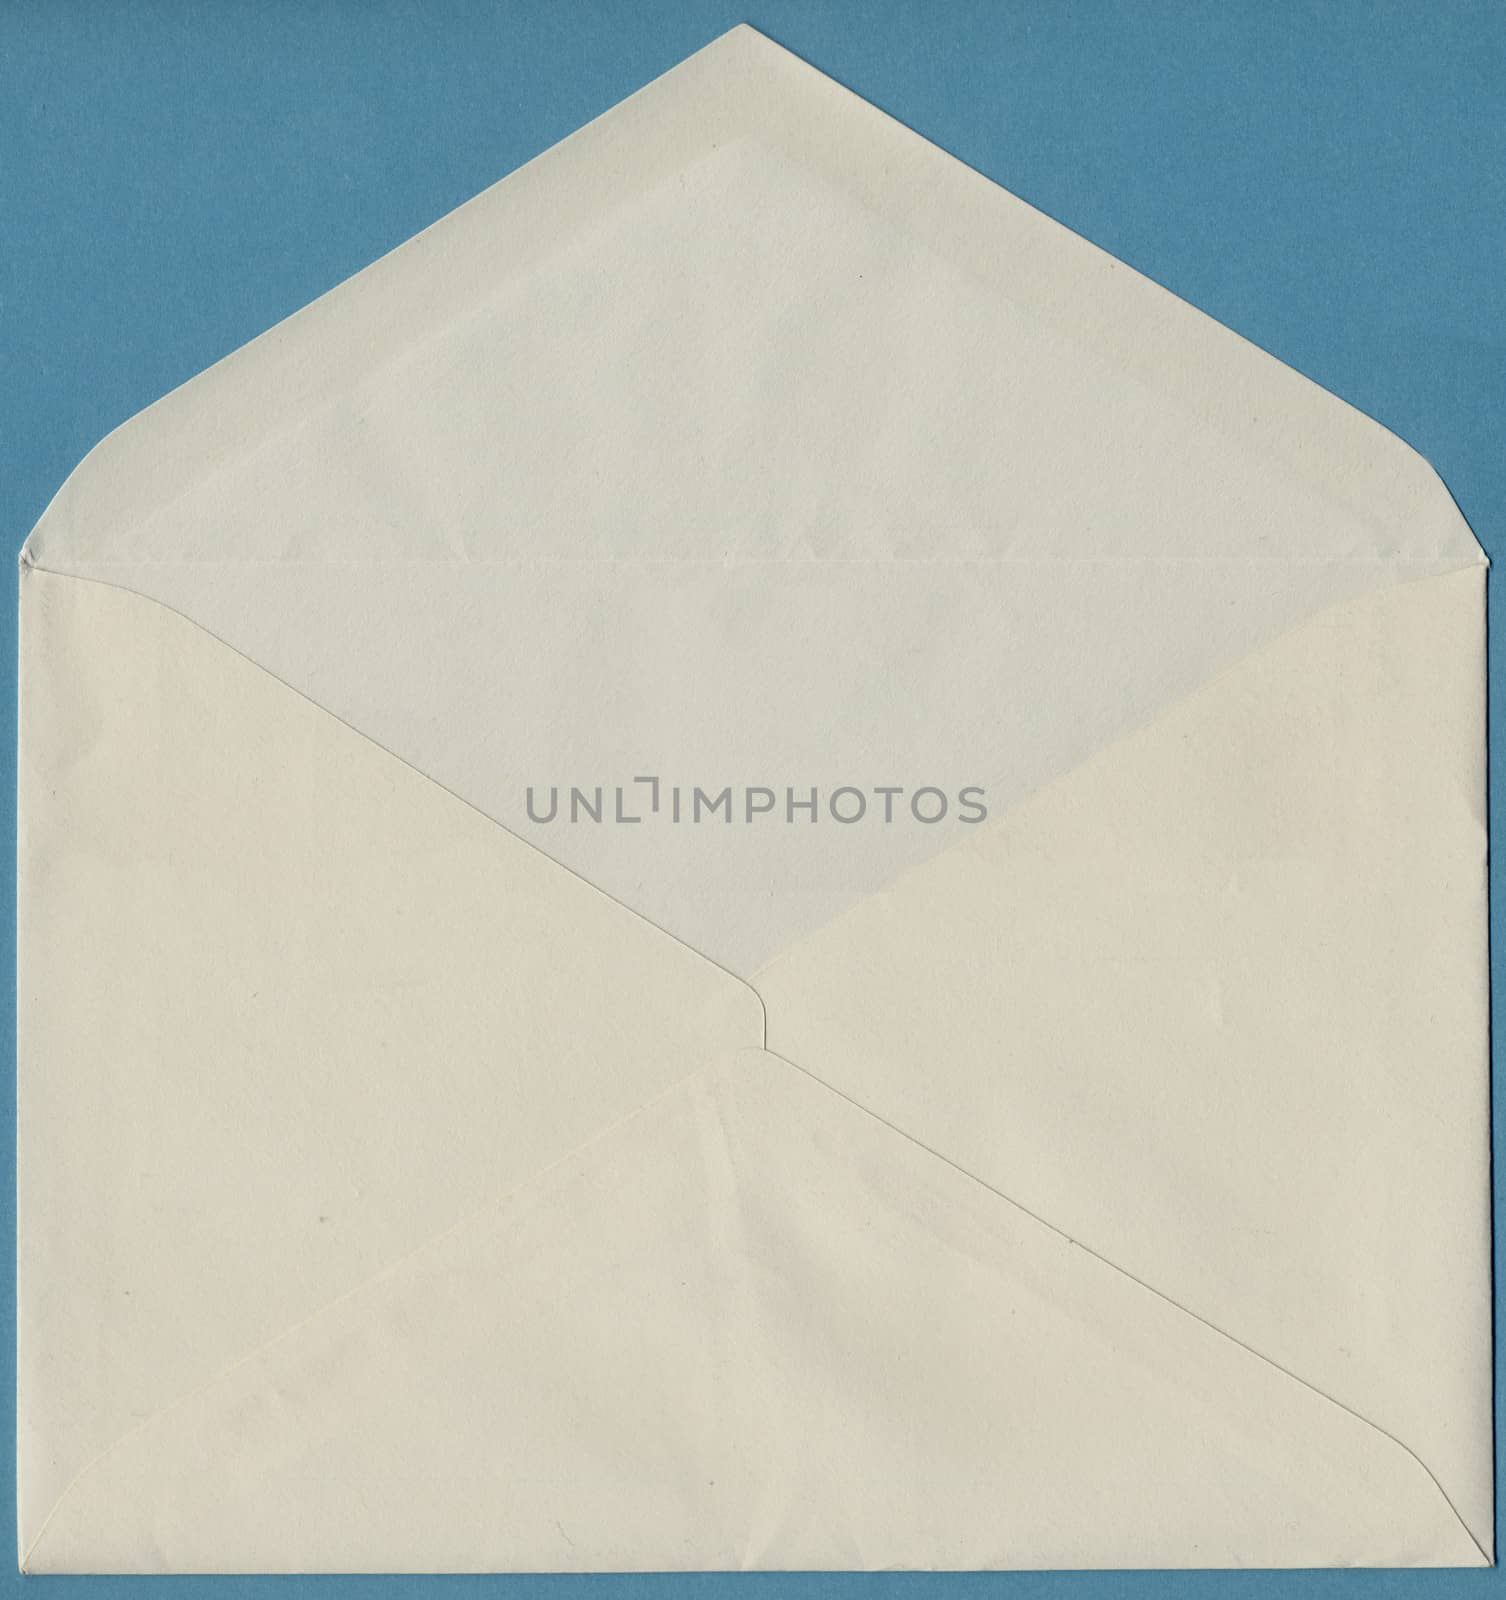 A letter envelope for mail postage shipping open